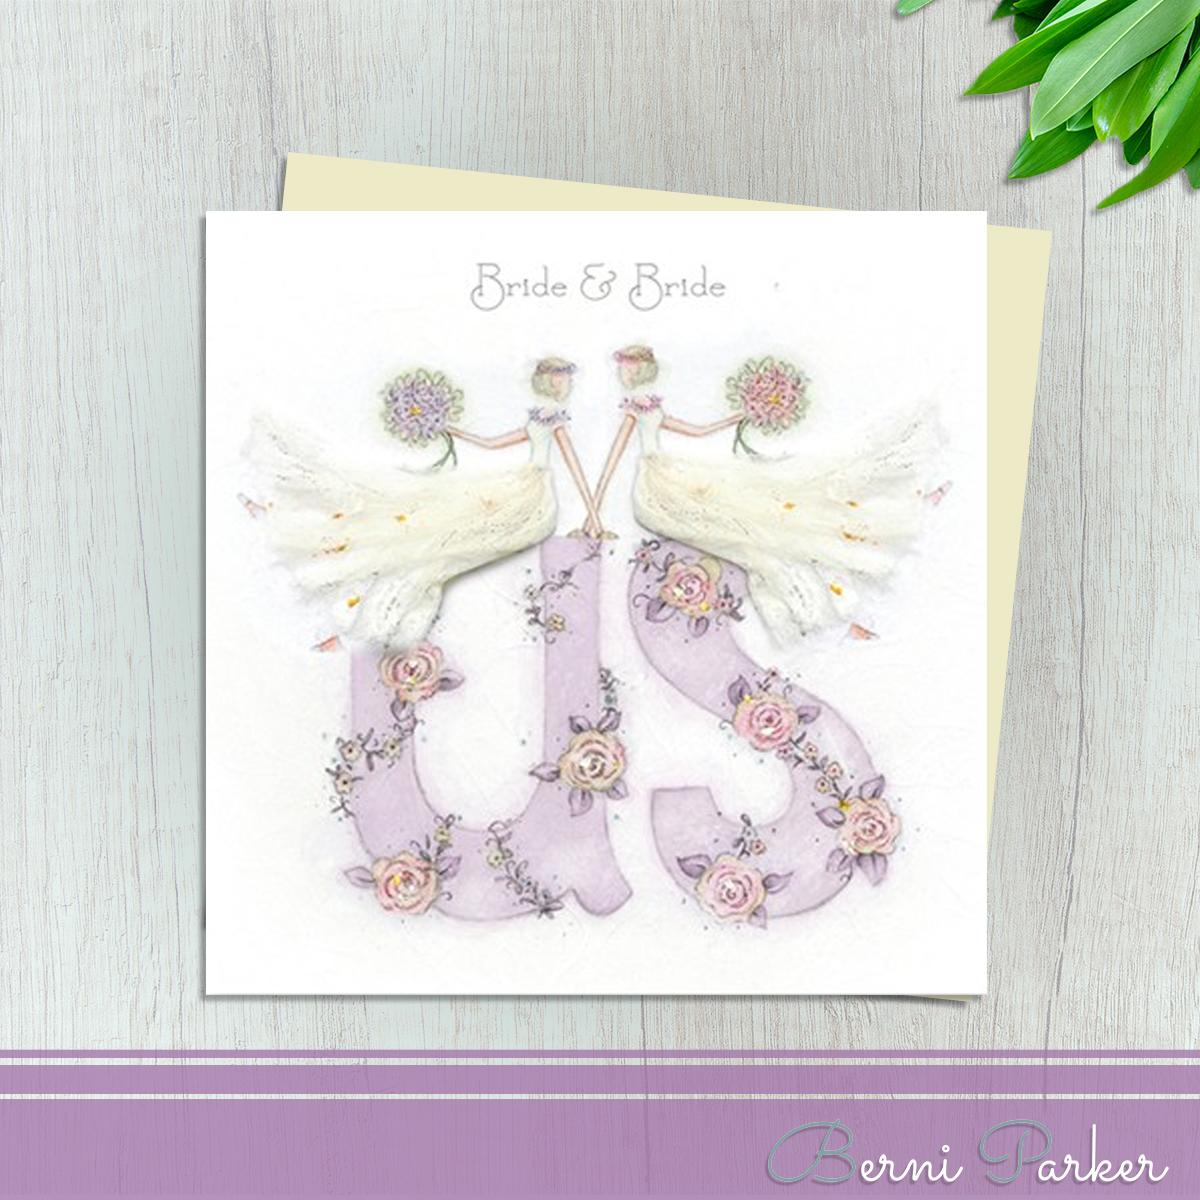 Two Brides Sitting On The Word Us For This Pretty Wedding Day Card From Berni Parker Designs. Finished With Silver Accents And Completed With An Ivory Envelope